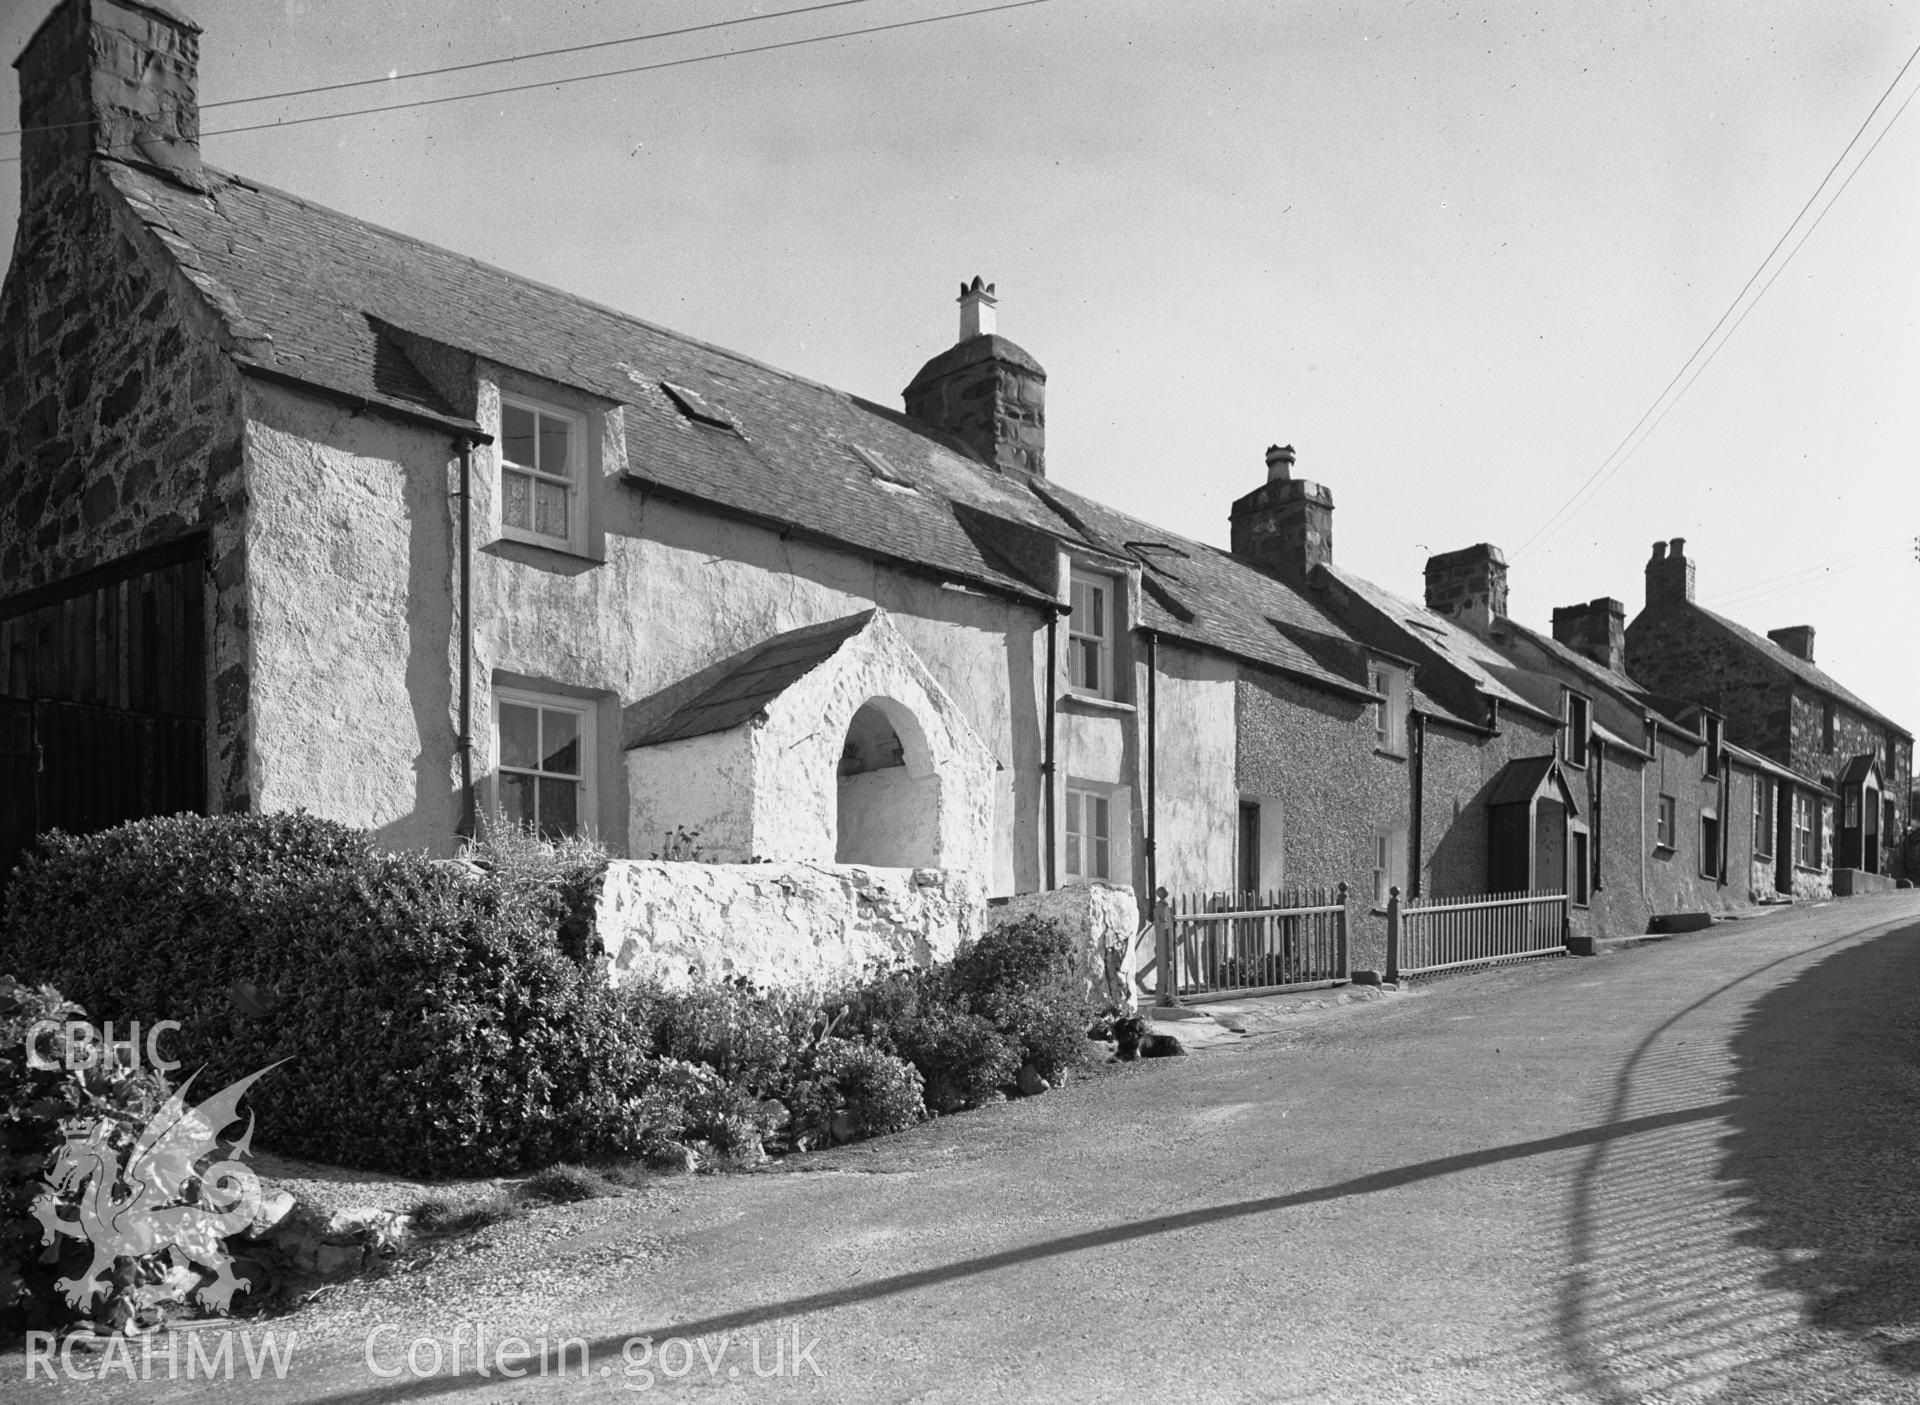 View of cottages on Rhiw Road.